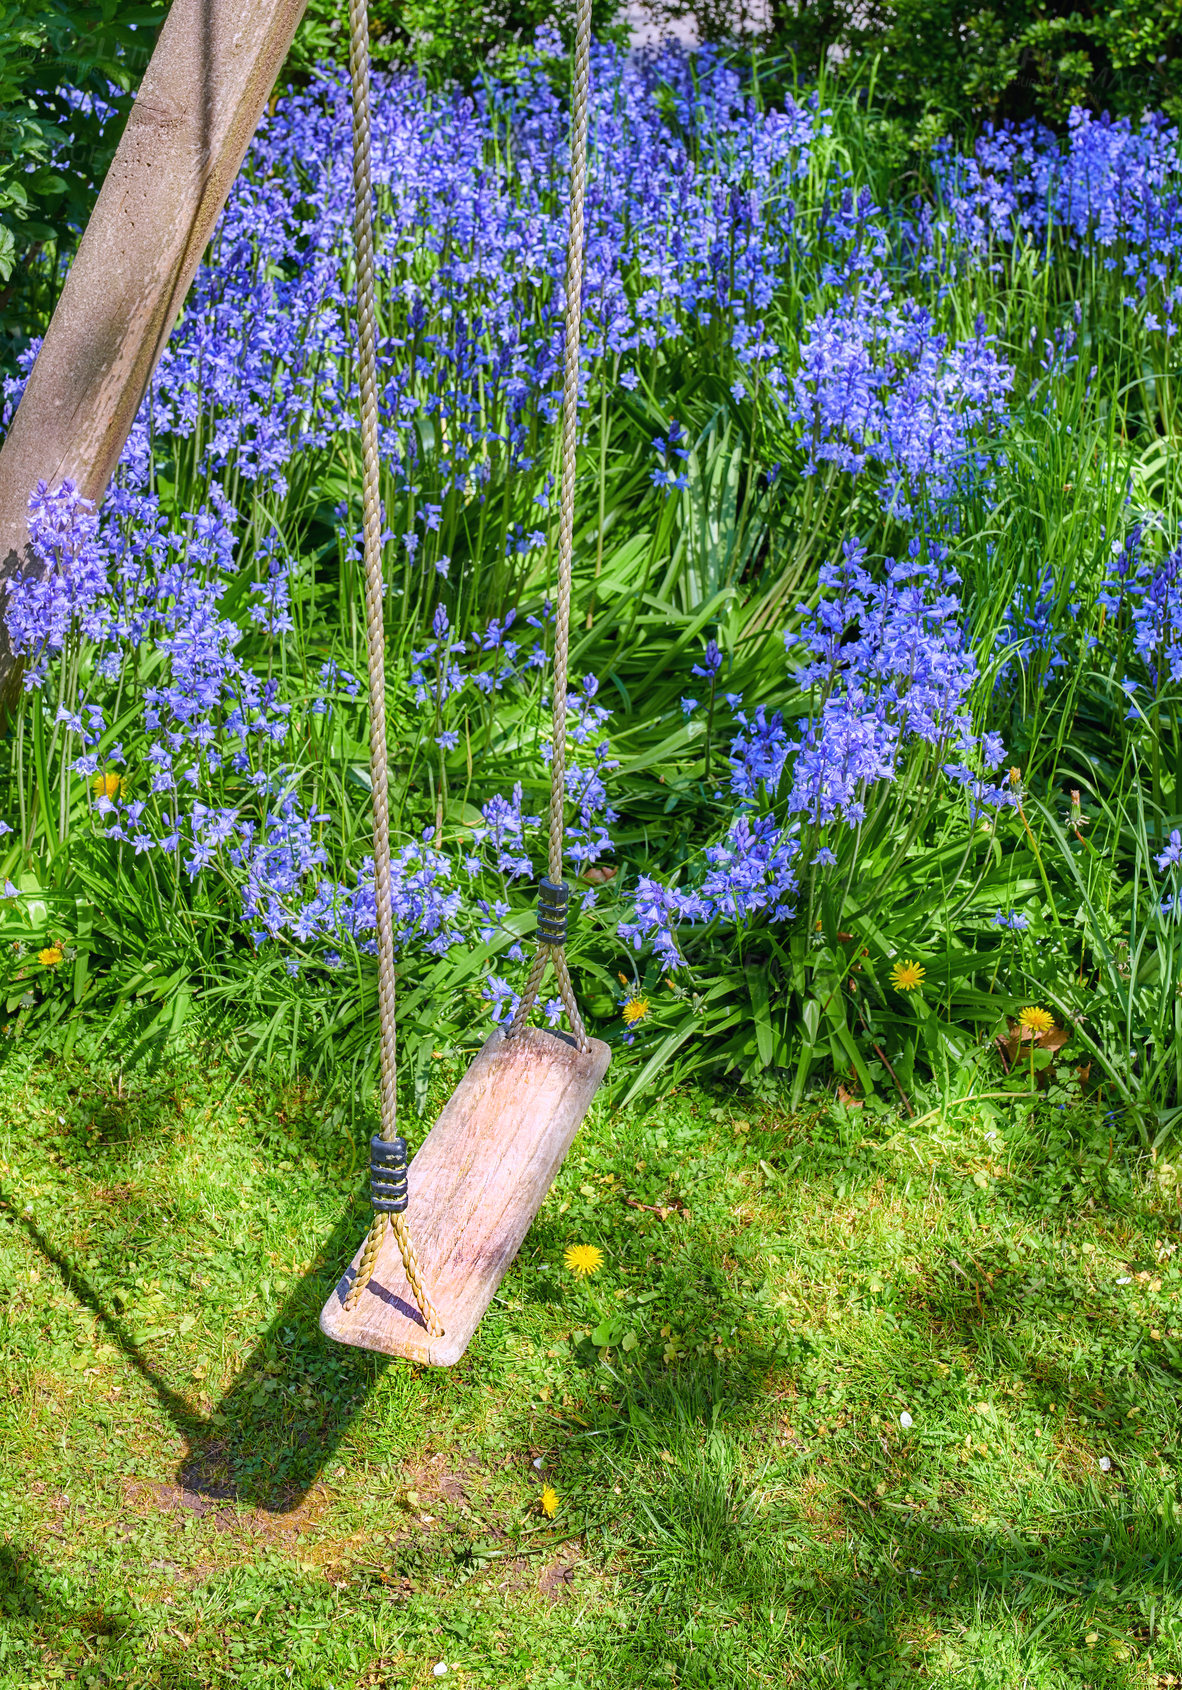 Buy stock photo A wooden empty swing with Bluebell flower growing in a green garden. Many blue flowers in harmony with nature, tranquil wild flora in a zen, quiet backyard with a hanging seat in a peaceful place